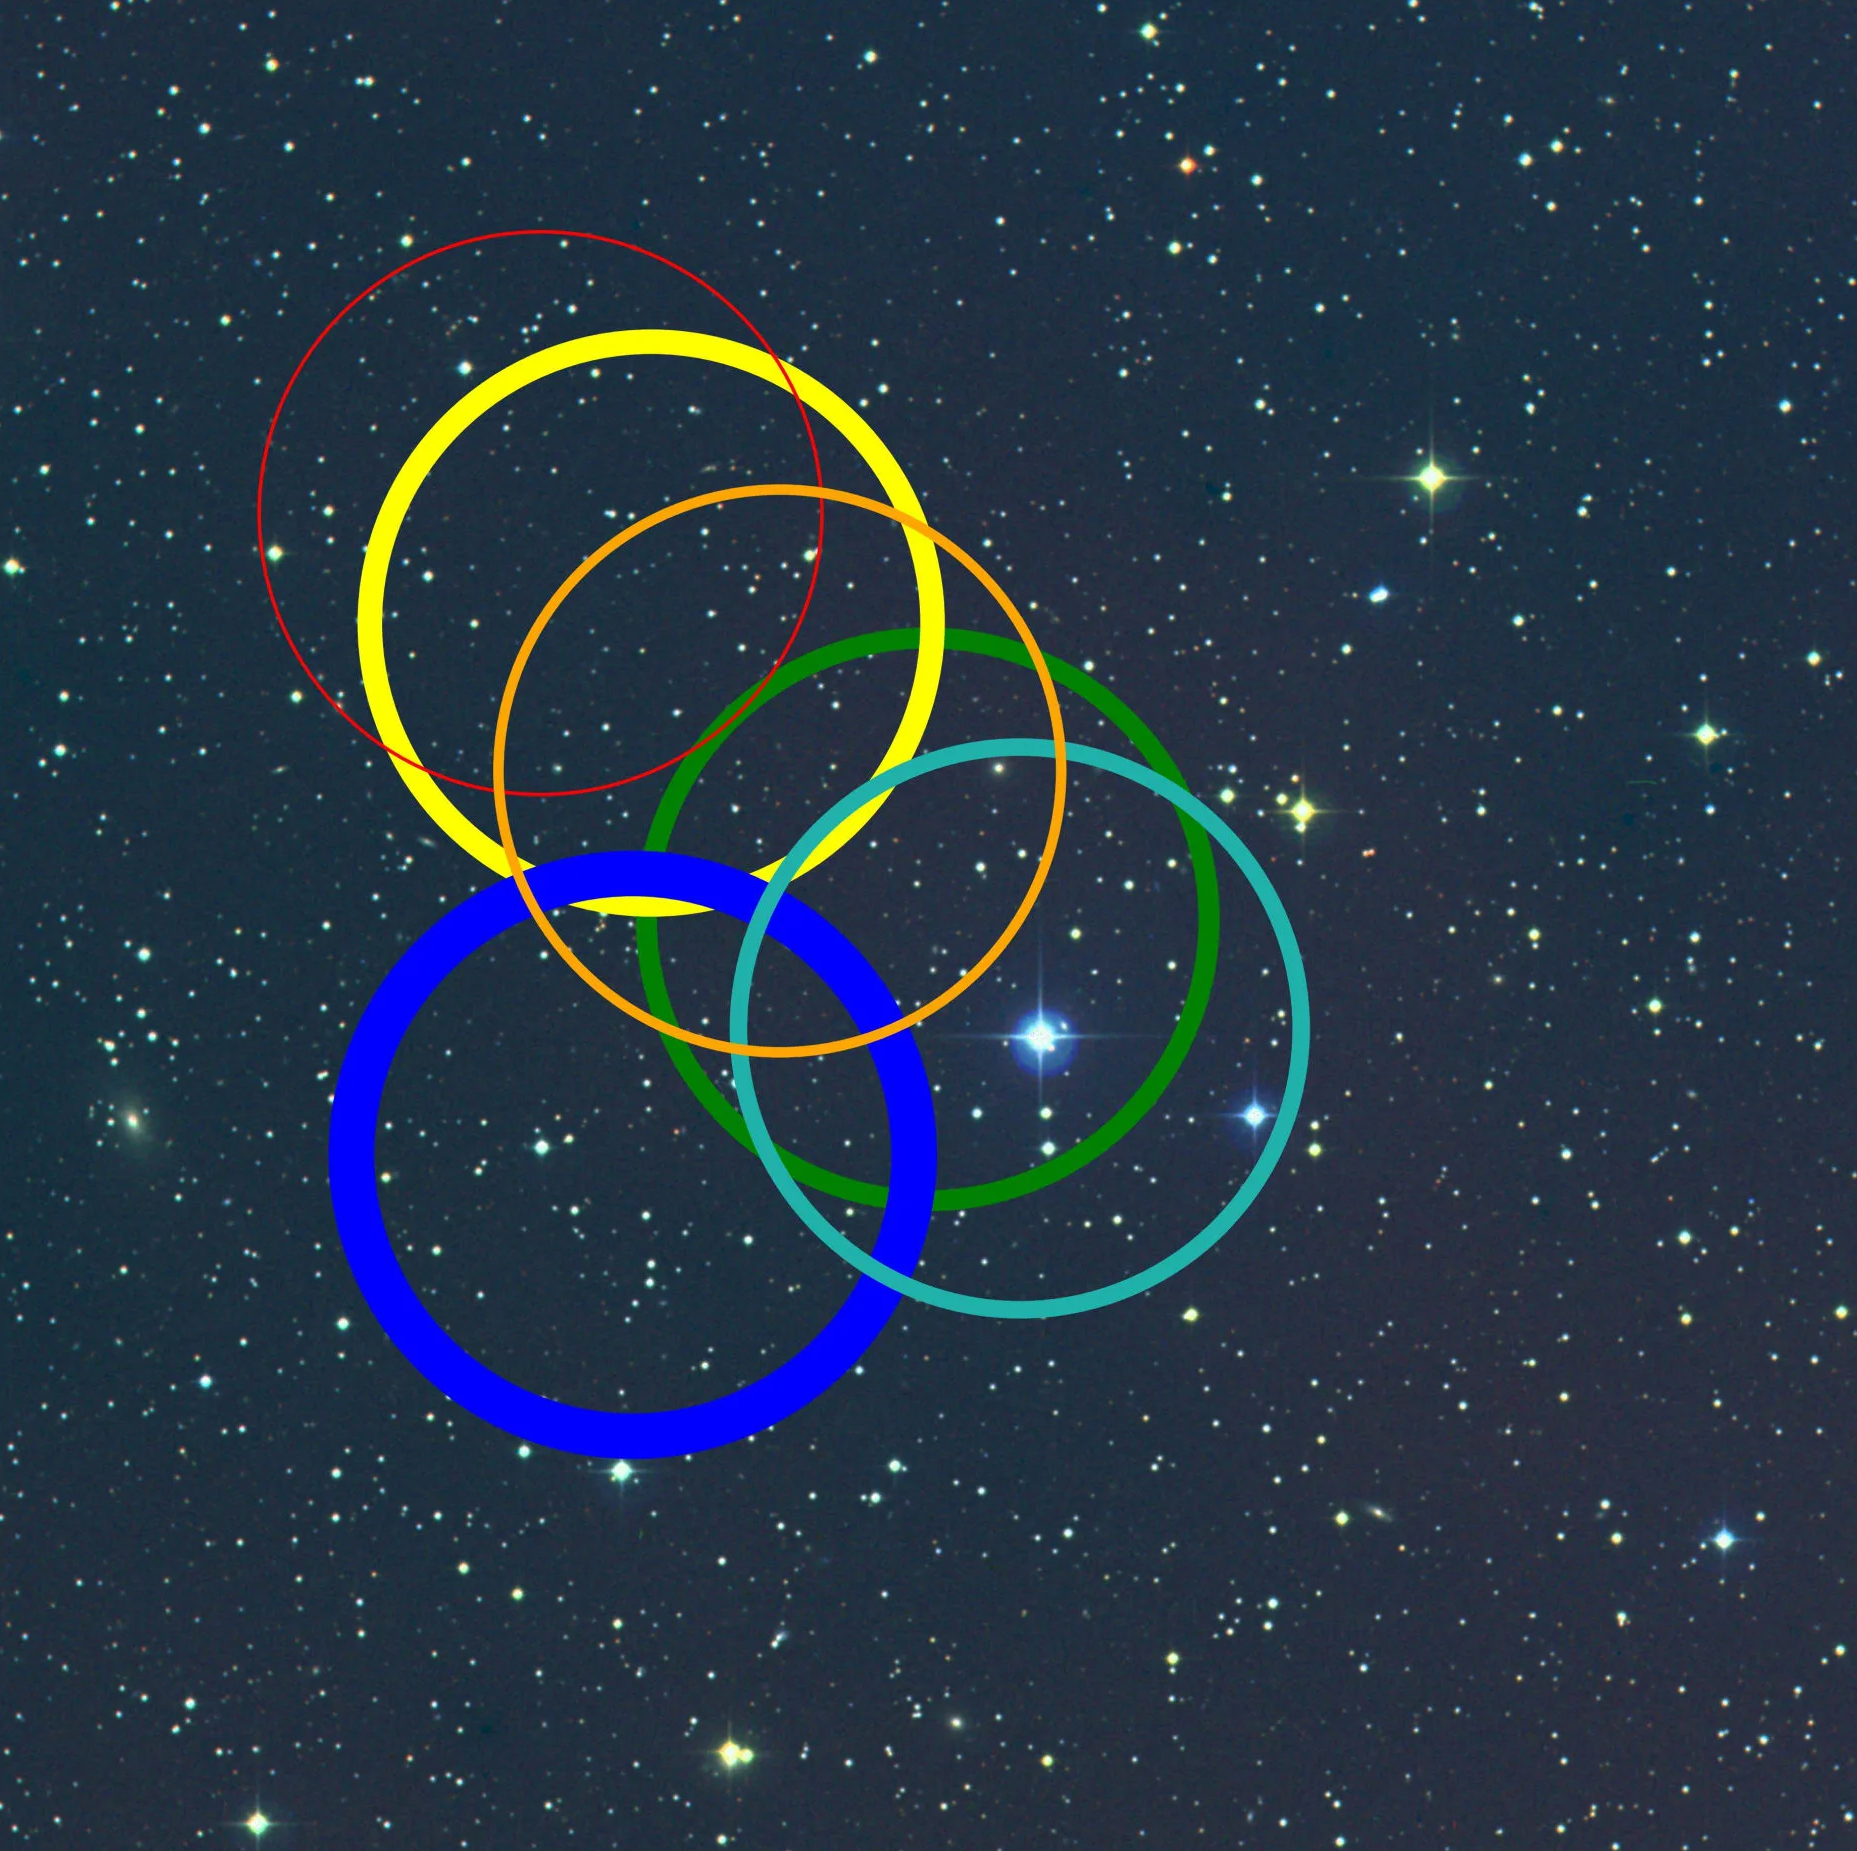 Olympic rings within a dark Galaxy.